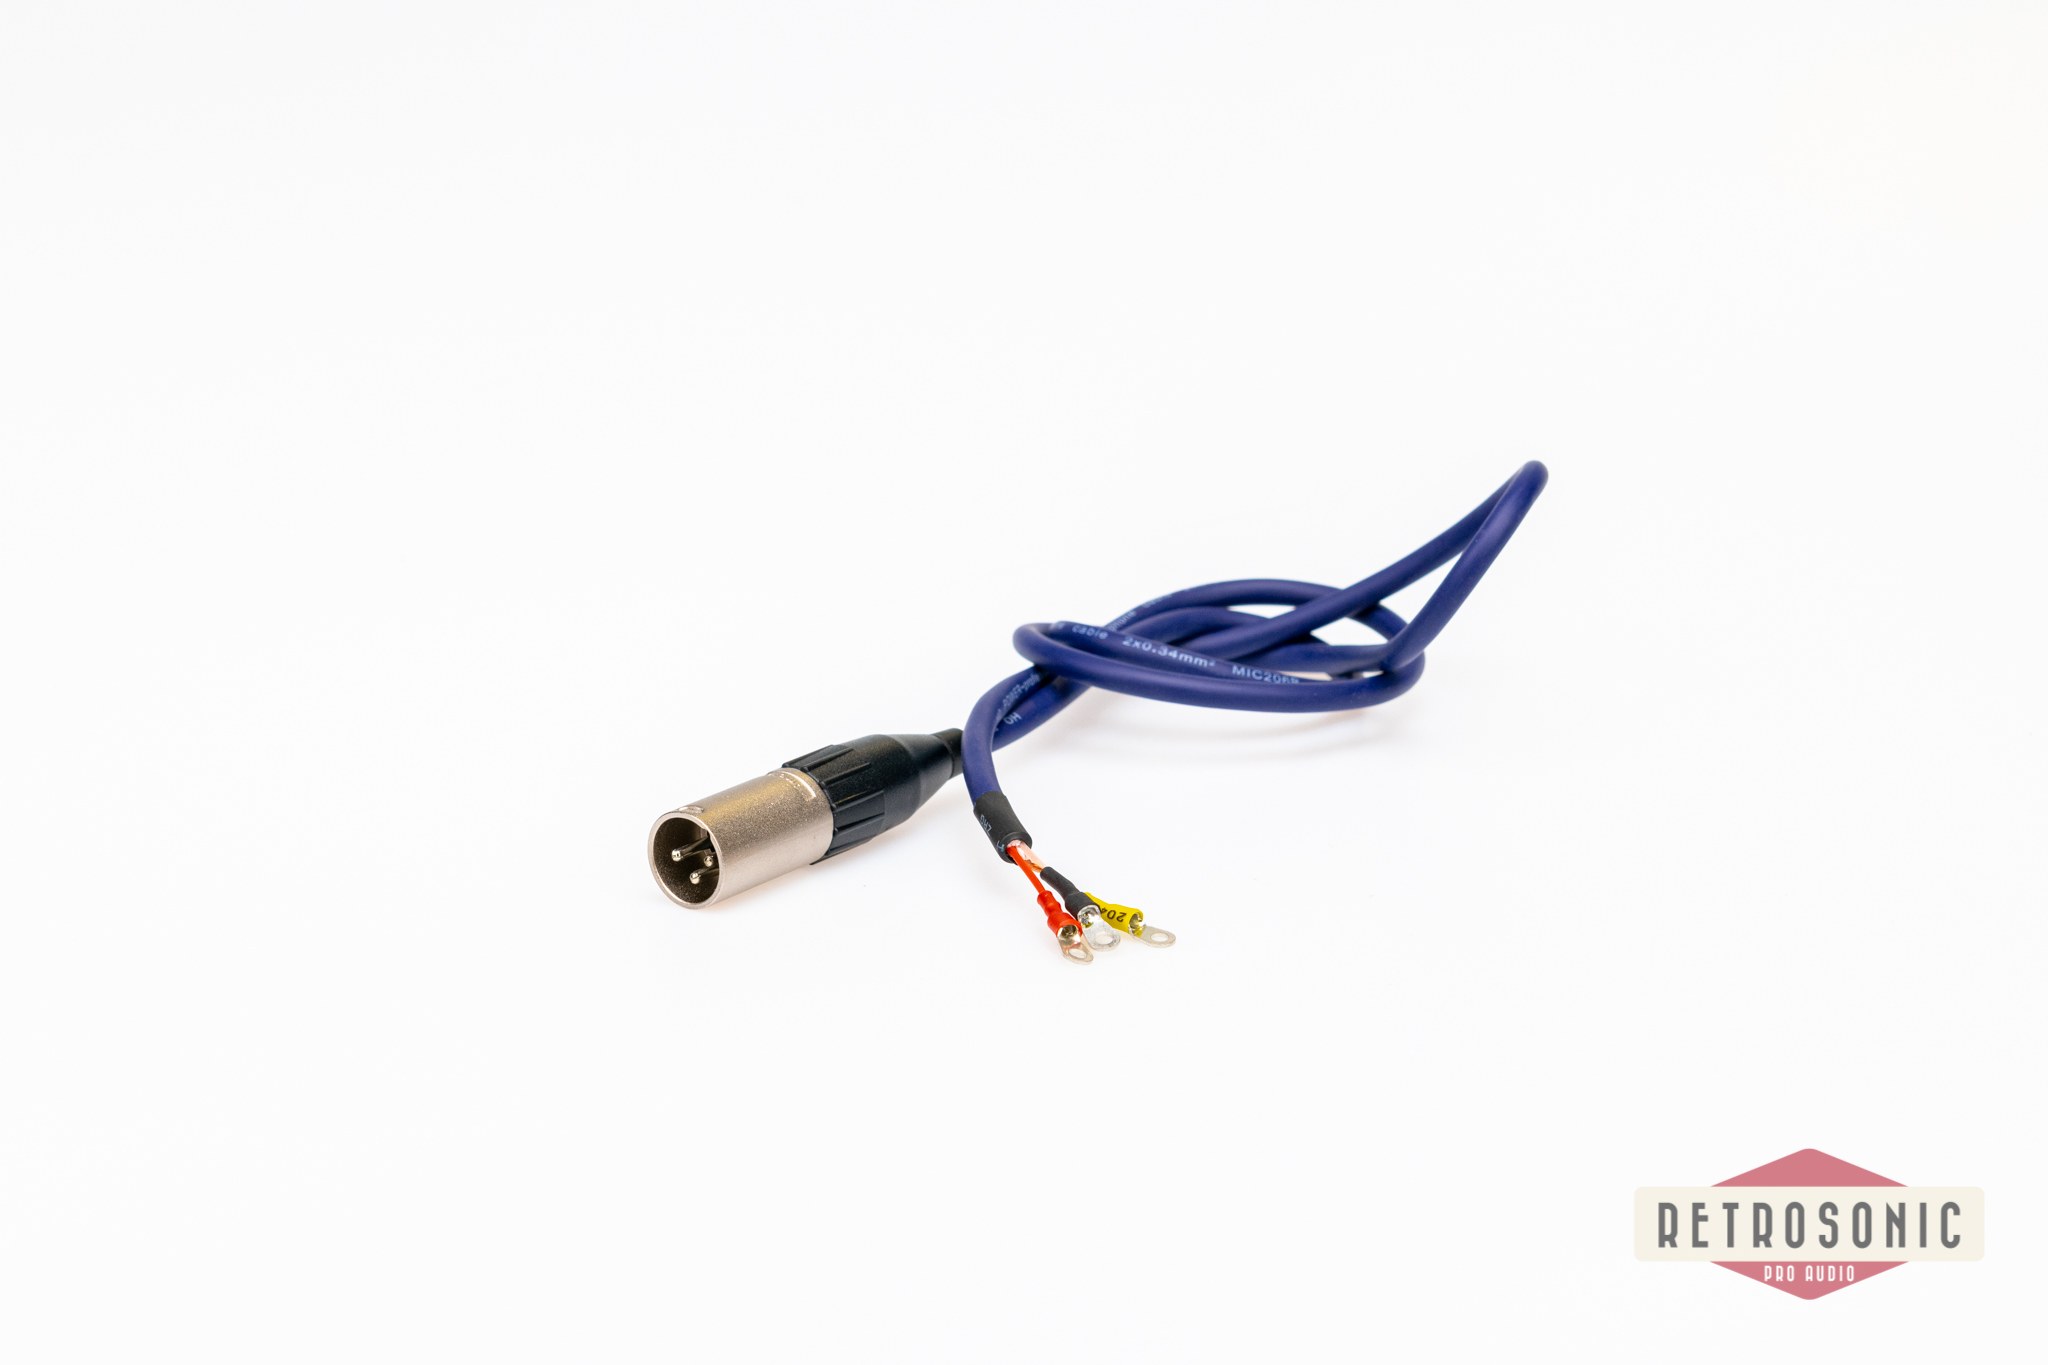 Retrosonic XLR-open end in/out cable set